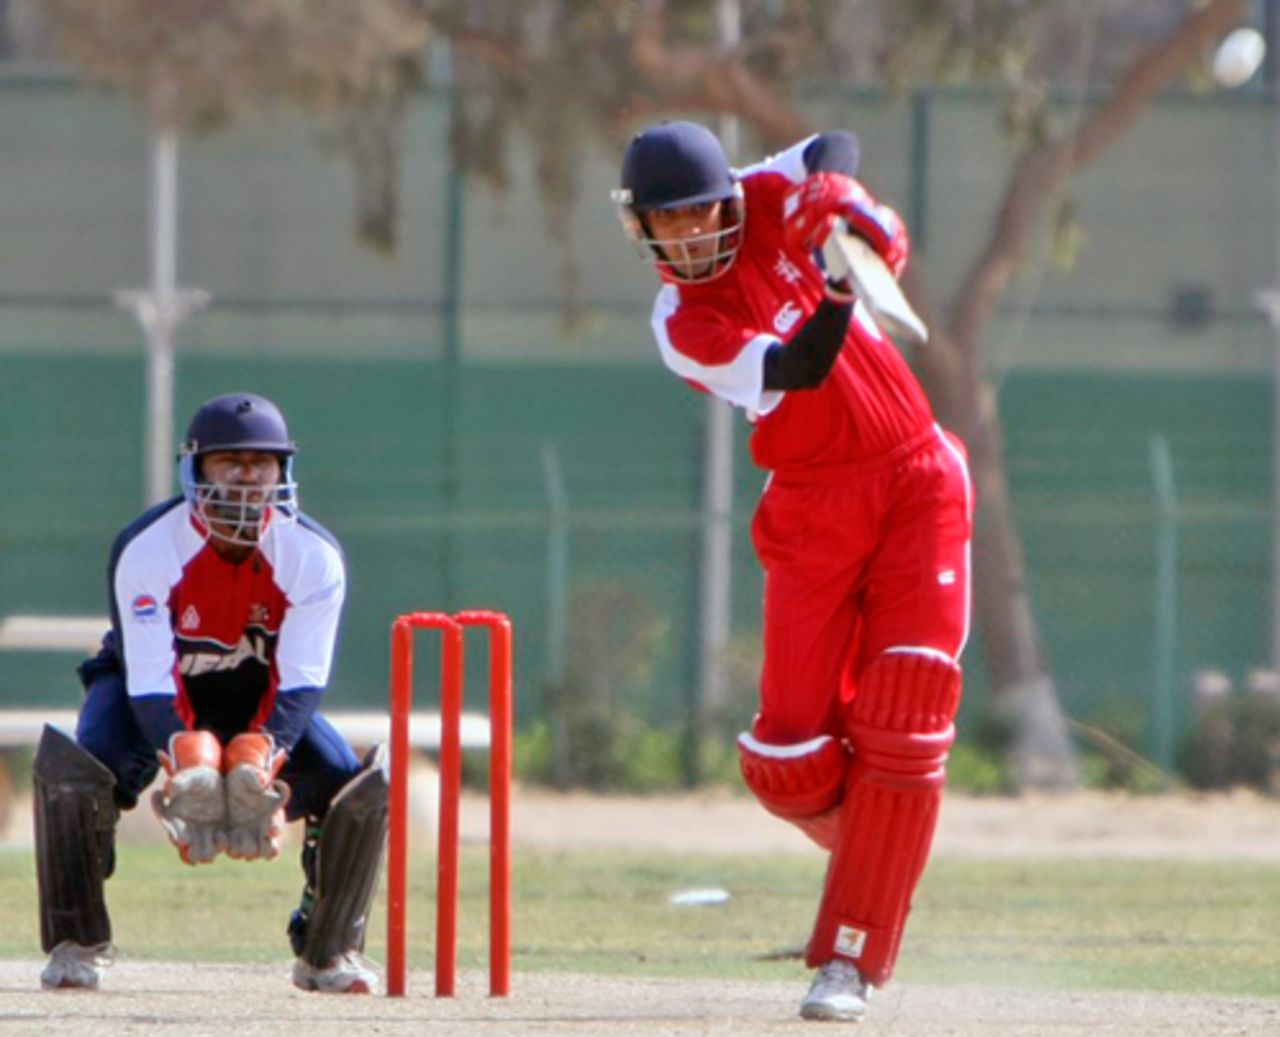 Waqas Barkat lofts one down the ground against Nepal at the ACC Trophy Elite 2010 being played in Kuwait